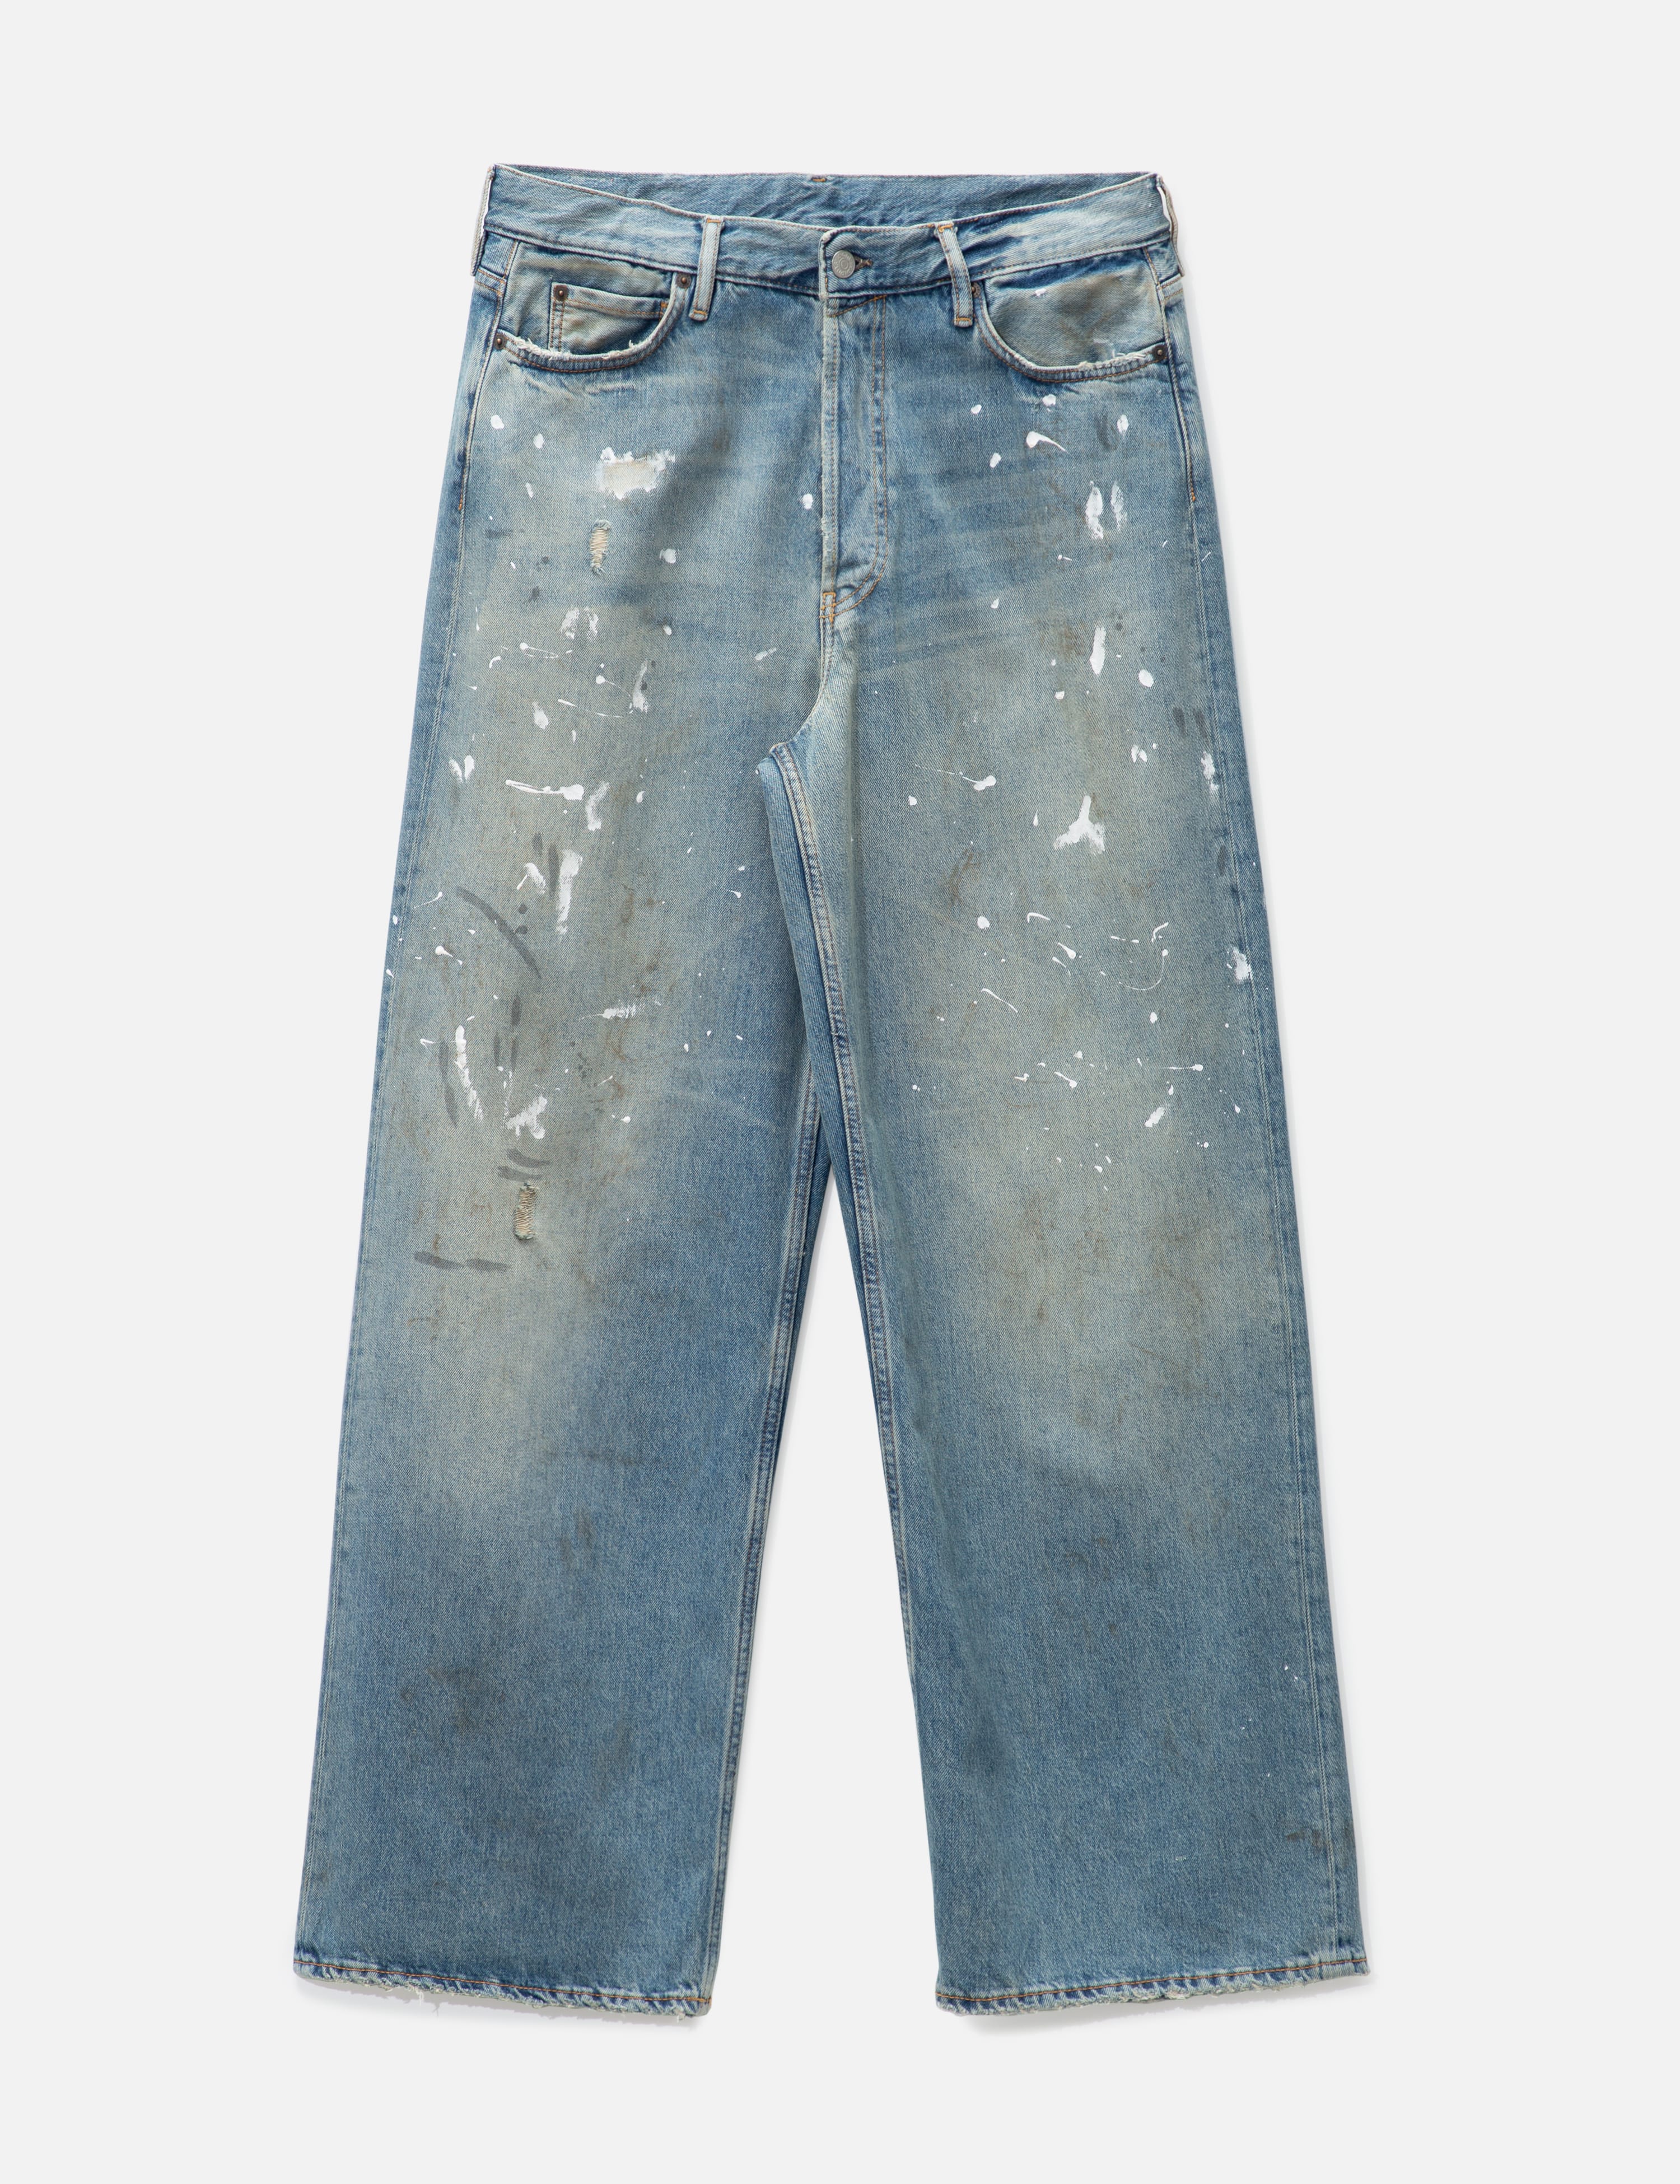 Acne Studios - Loose Fit Jeans - 1981M | HBX - Globally Curated 